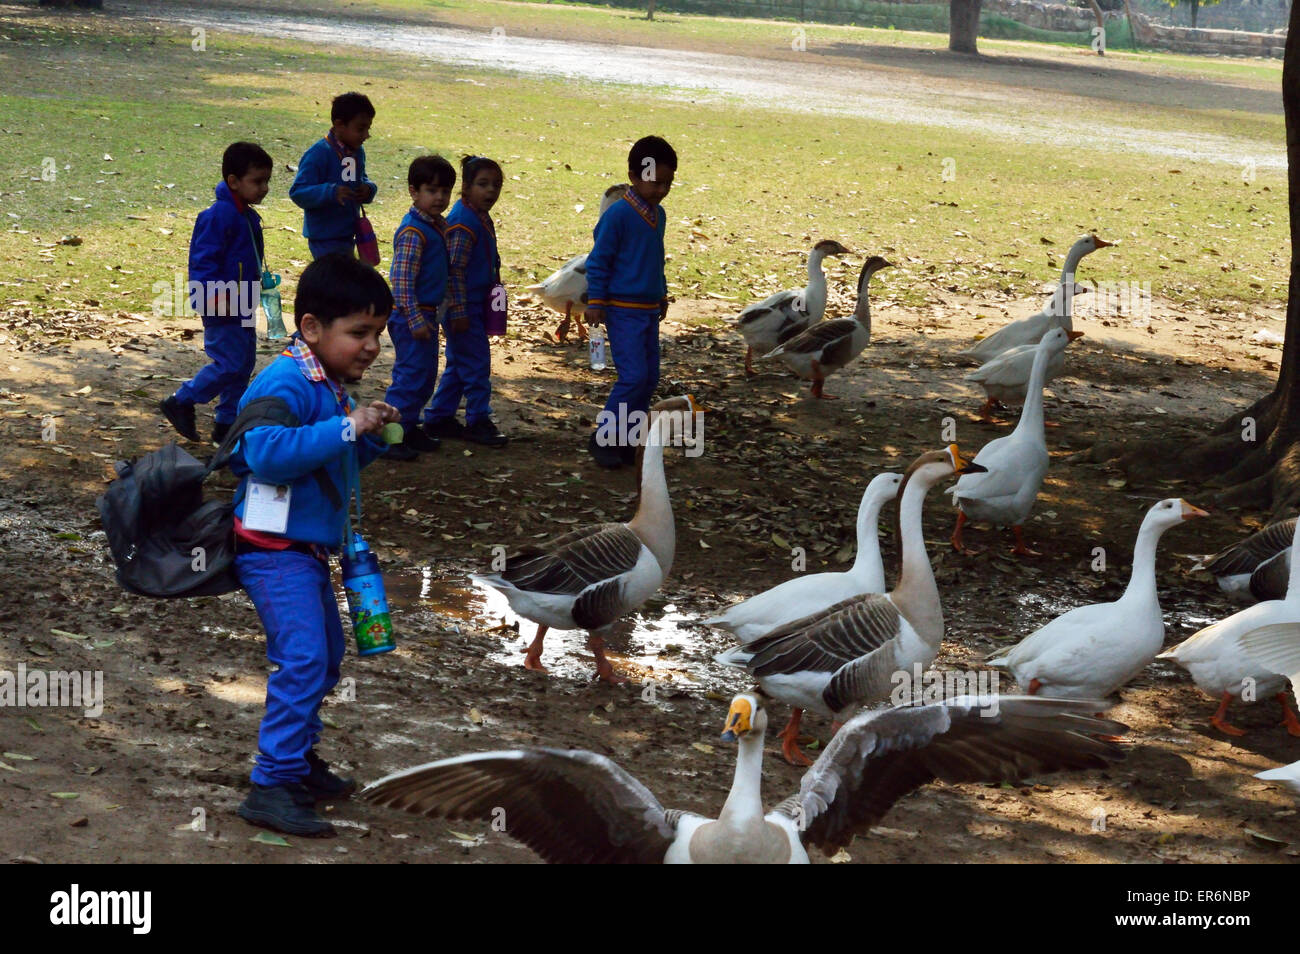 Indian School kids on a day out at Lodhi Gardens Delhi India February 2015 excited and chasing ducks at the park Stock Photo